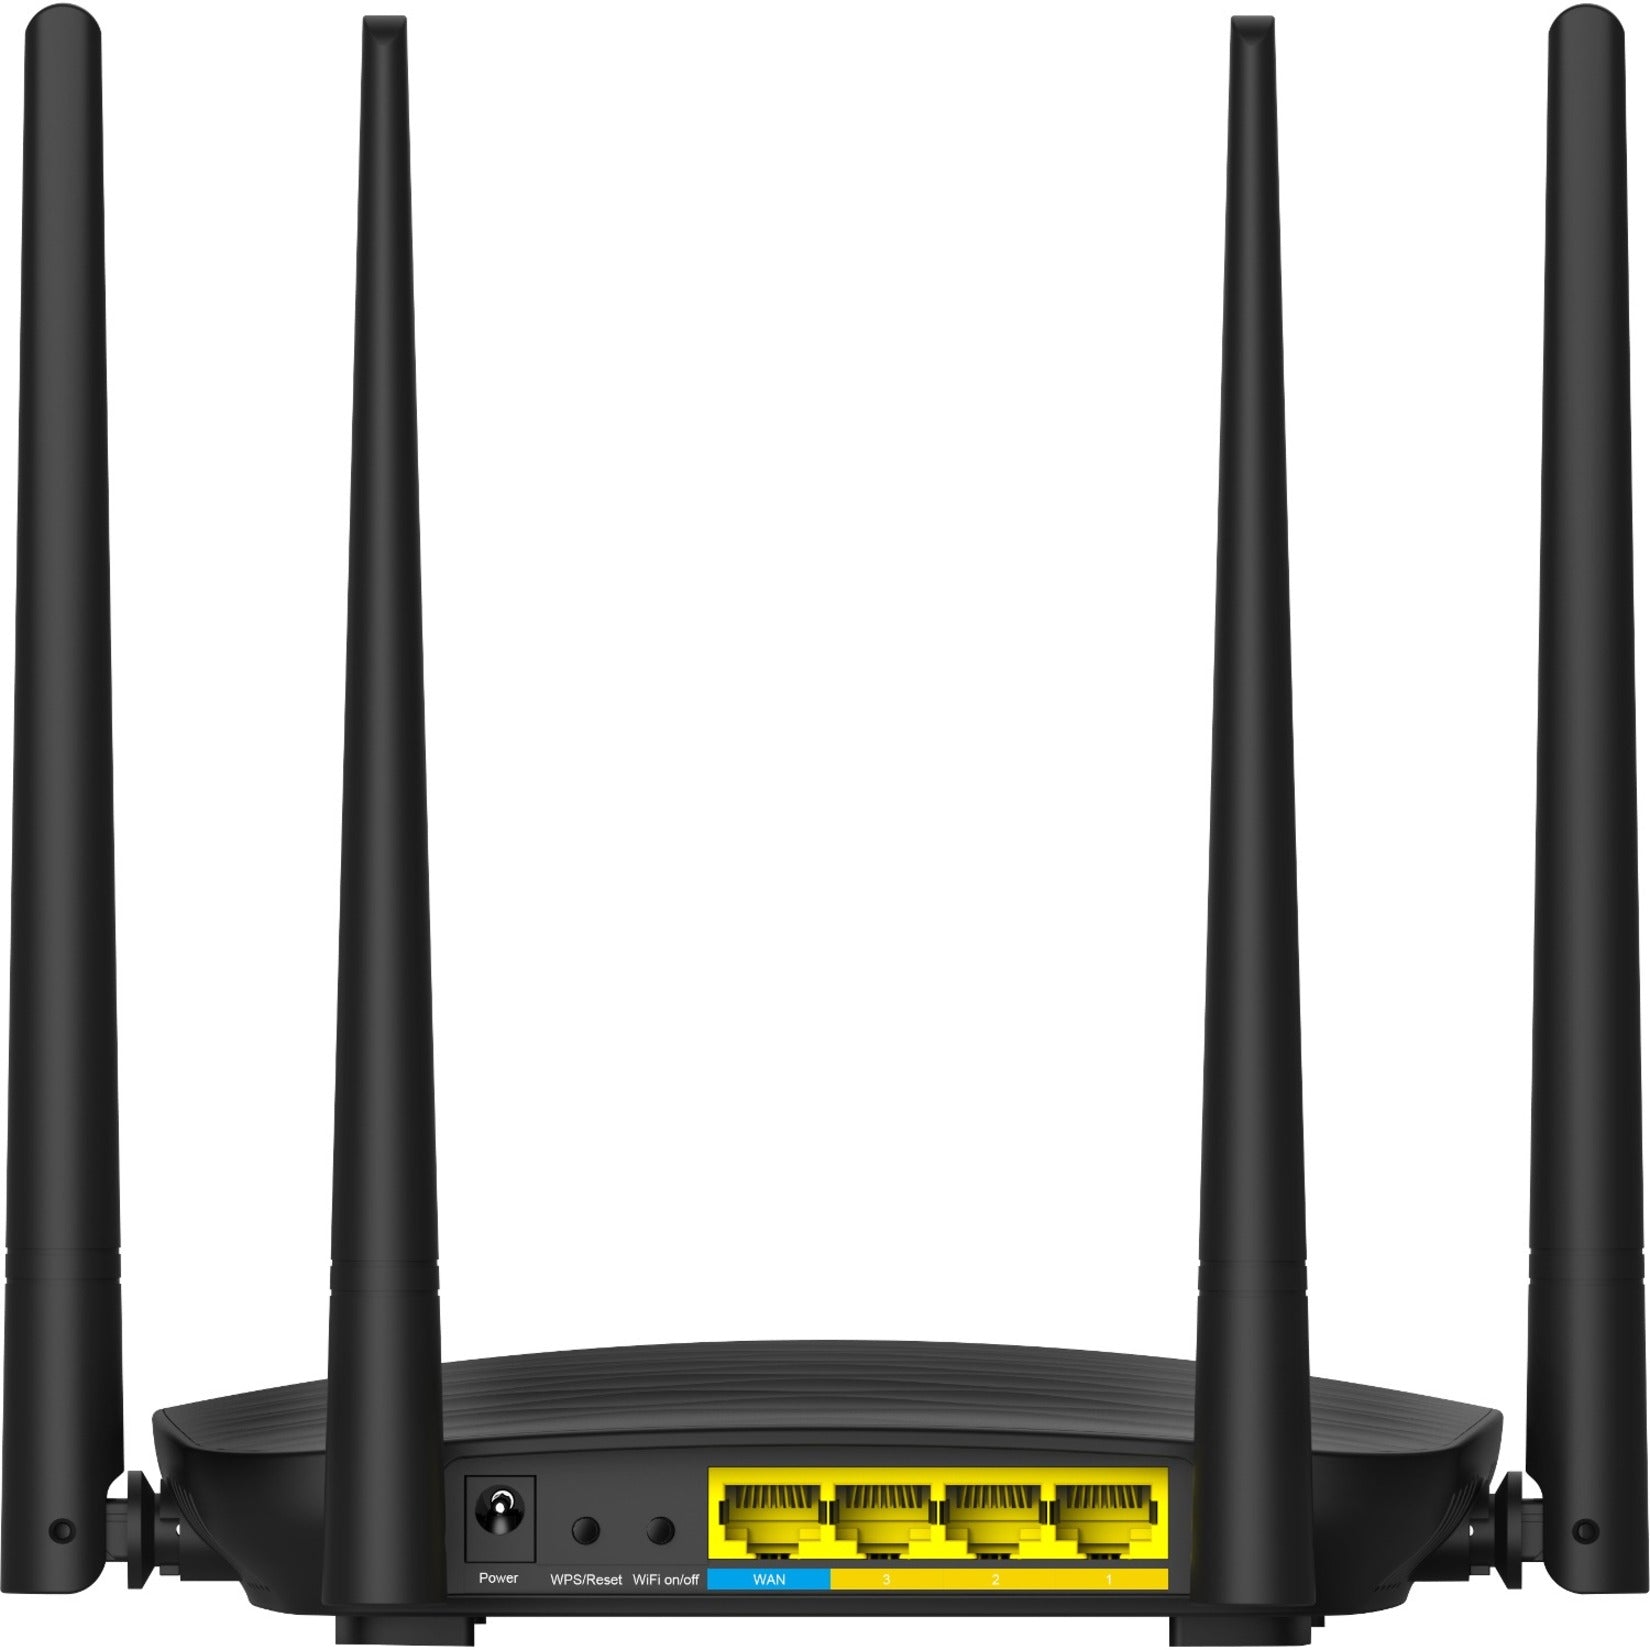 Tenda AC5 AC1200 Smart Dual-Band WiFi Router, Fast Ethernet, 145.88 MB/s